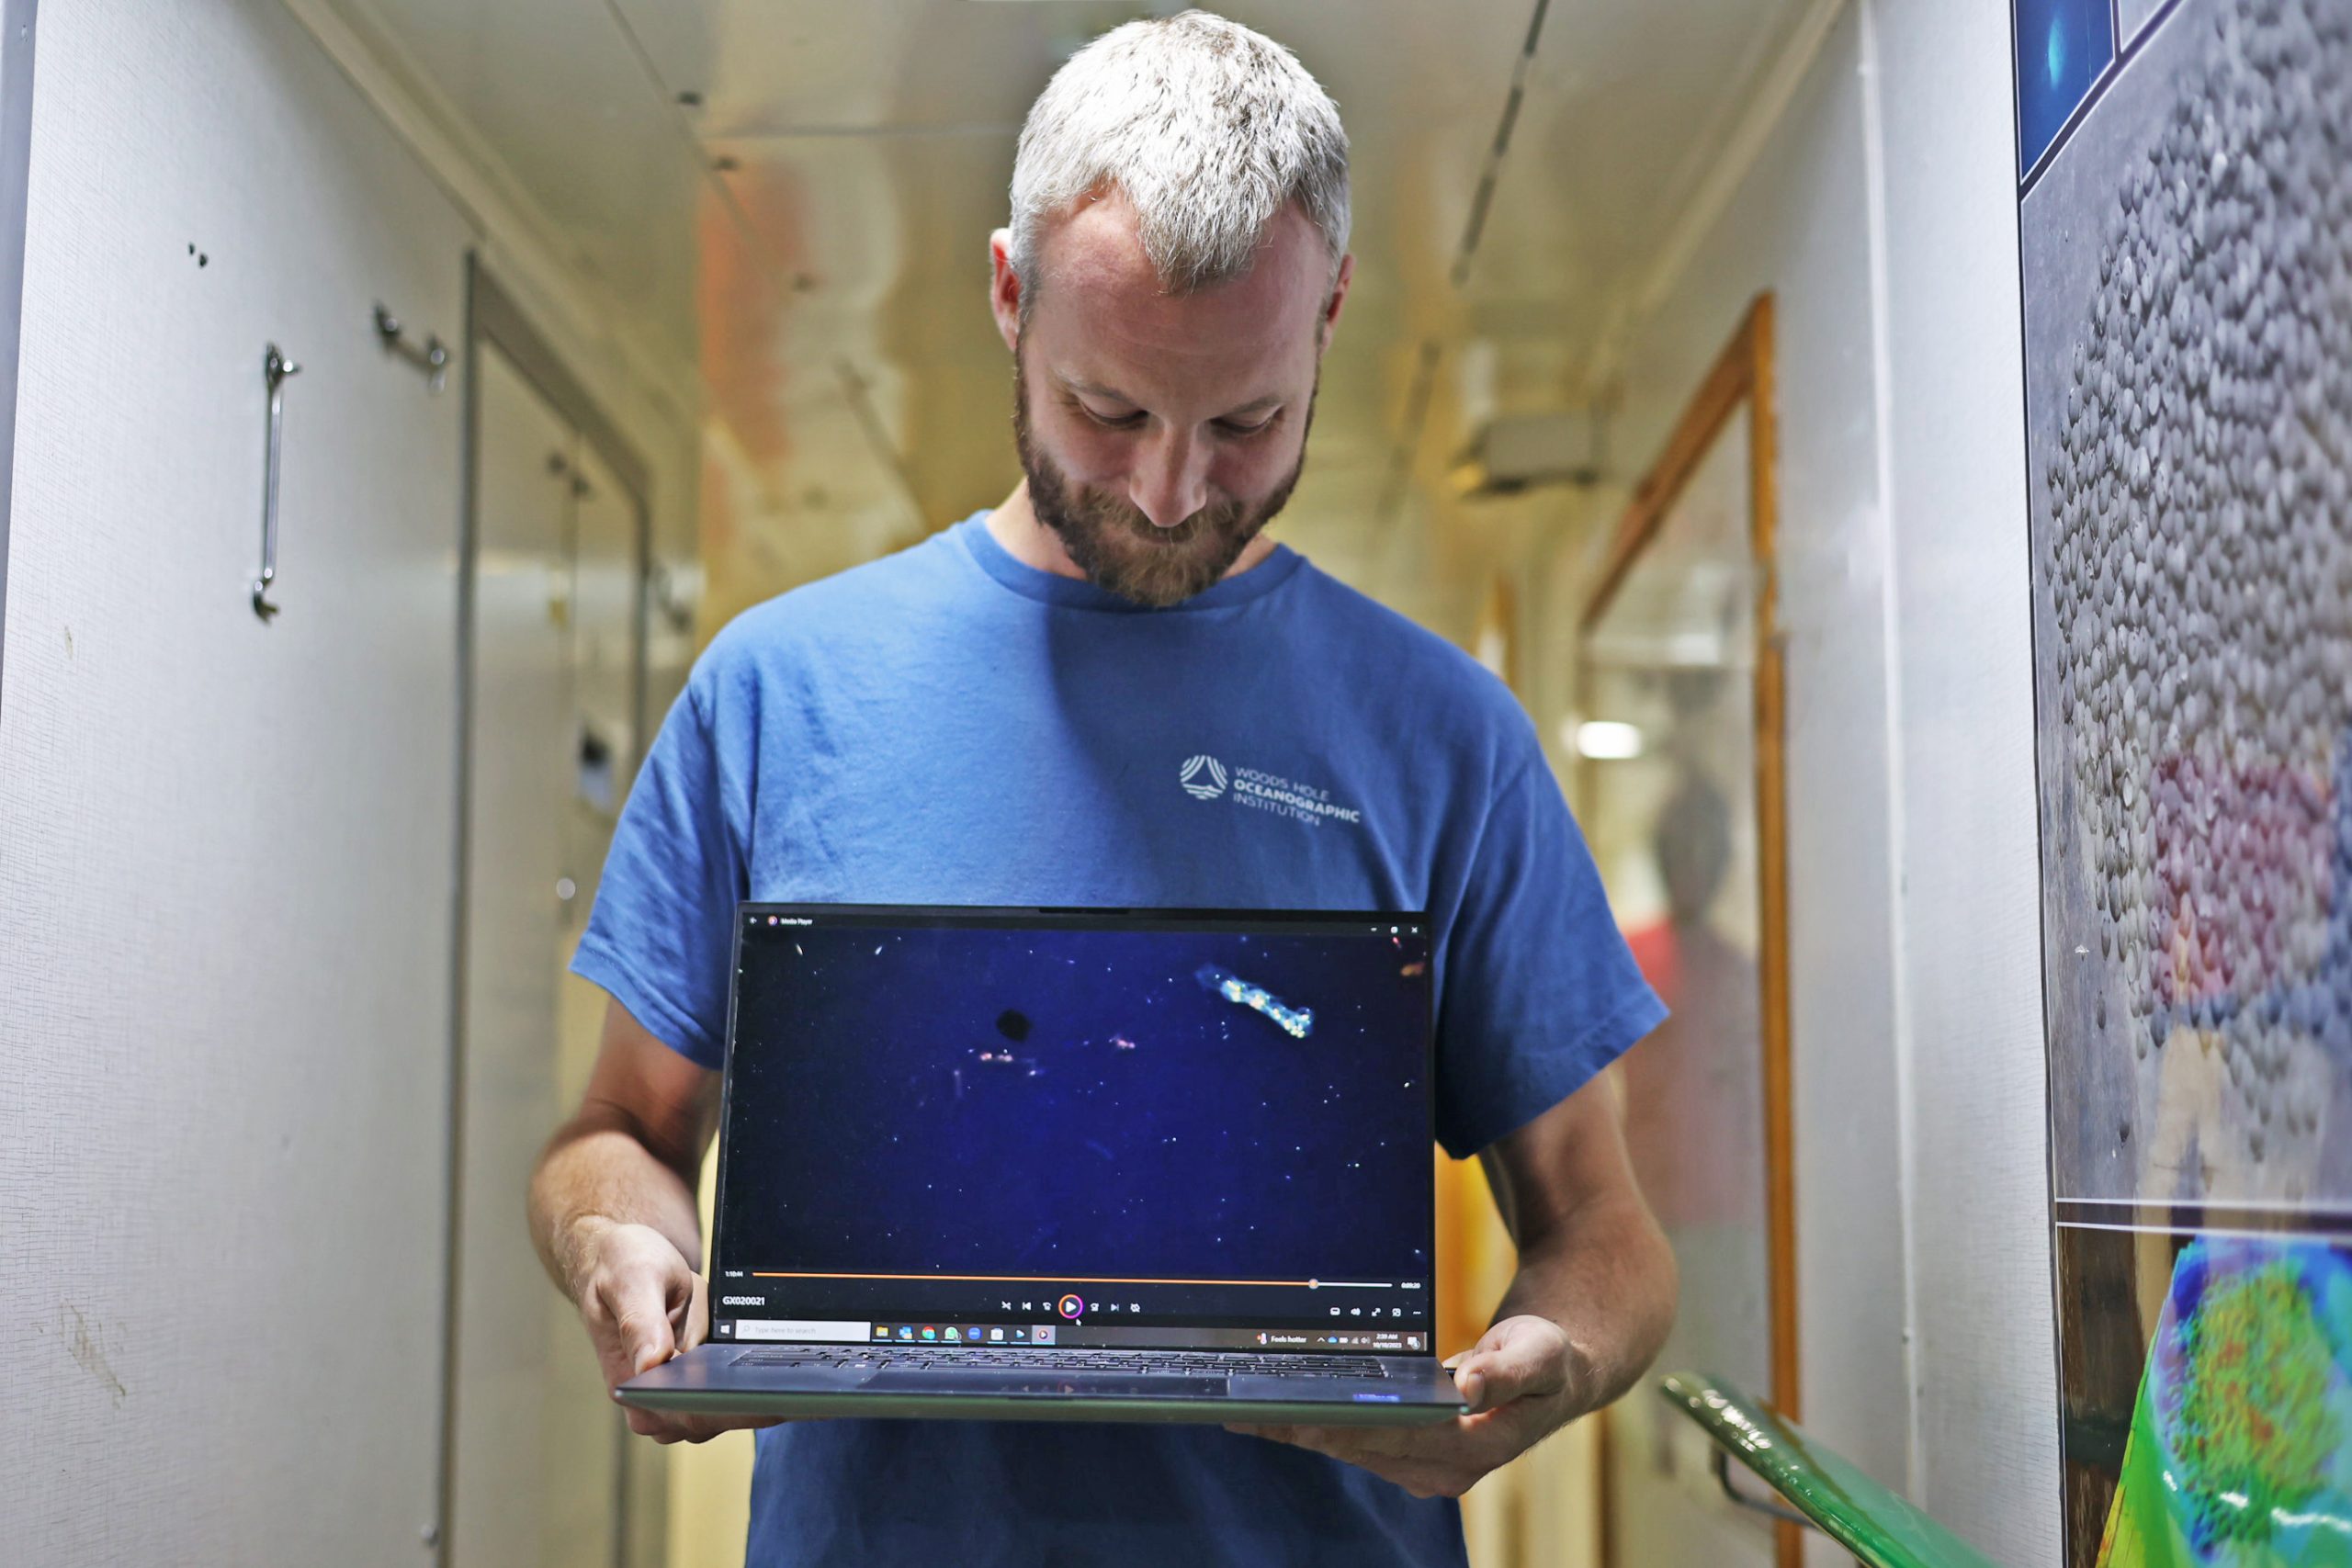 WHOI Mechanical engineer Eric Hayden shows the author a video of animals in the ocean twilight zone. The video had been recorded by <i>Mesobot</i> only moments before.